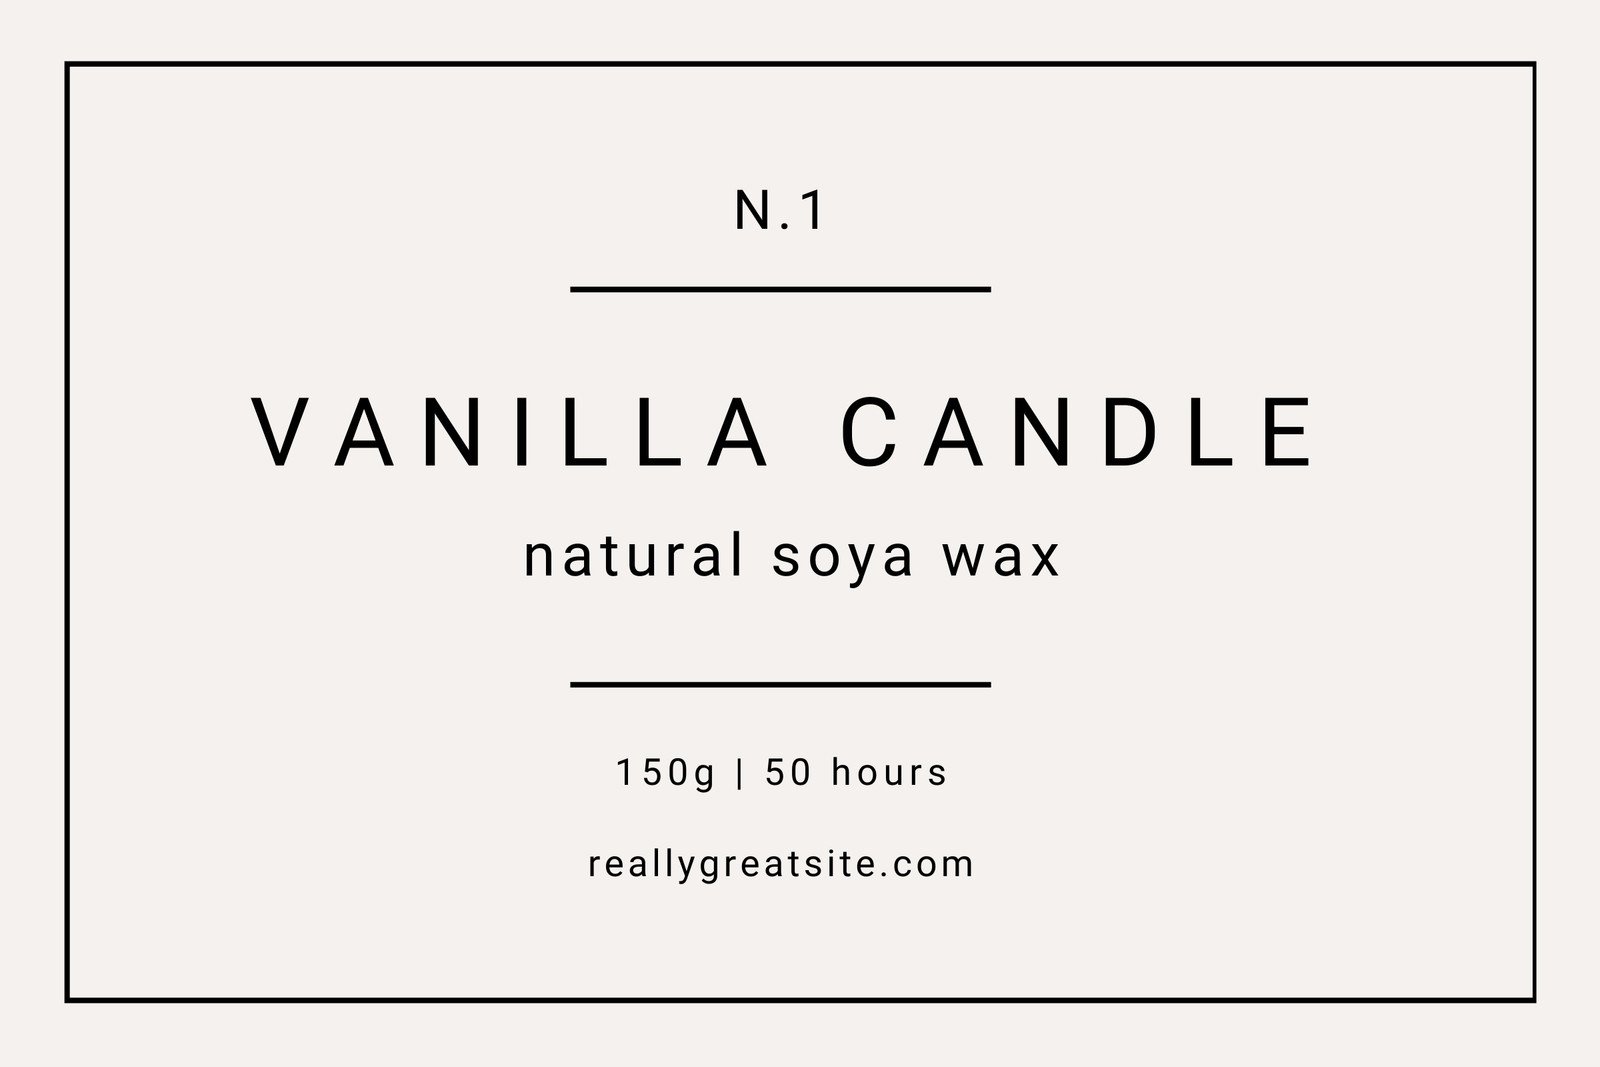 Homemade Vanilla Label, Vanilla Extract Label Template, Vanilla Labels for  Jars, Candles, Room Spray, Spices. Edit Online, Download & Print. 